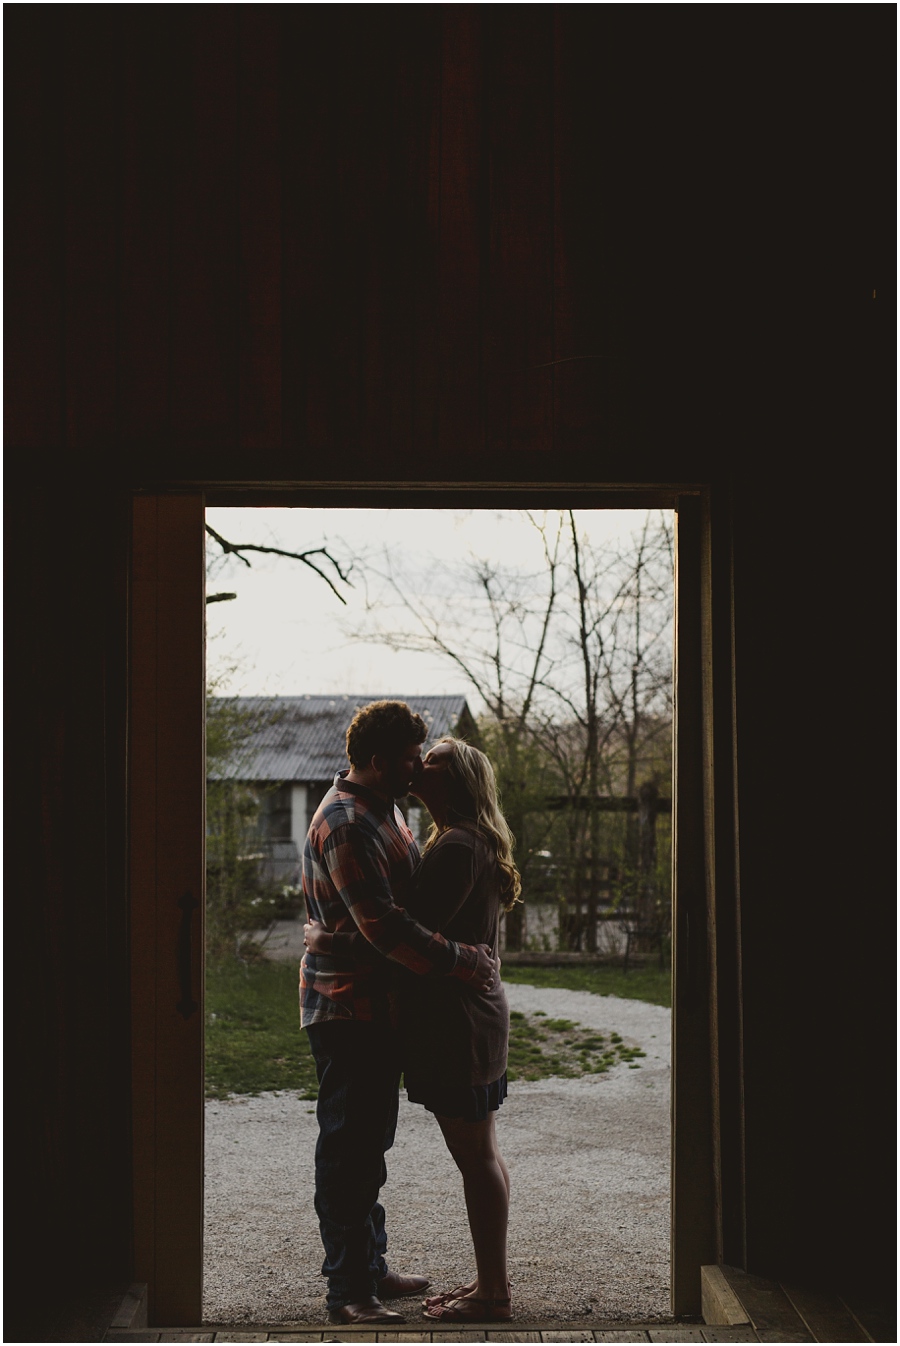 Emily and Nathan silhouetted in the doorway at Meadow Hill Farm.